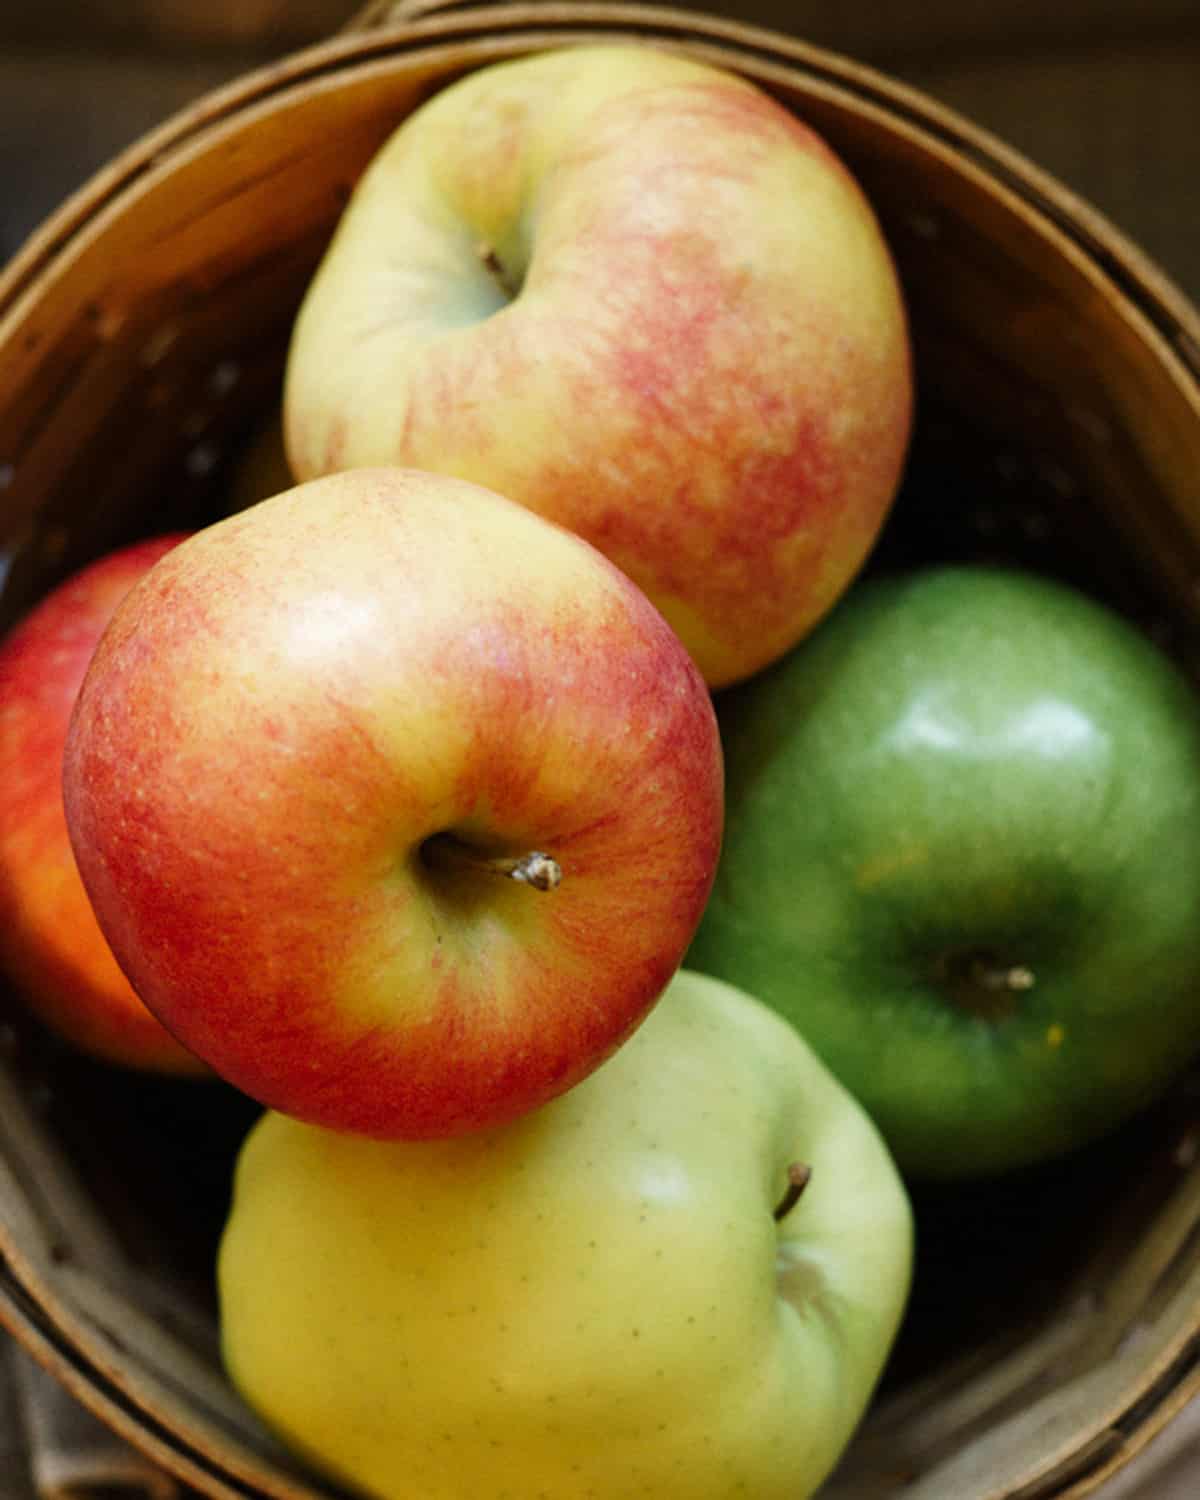 Fresh apples in a bowl.